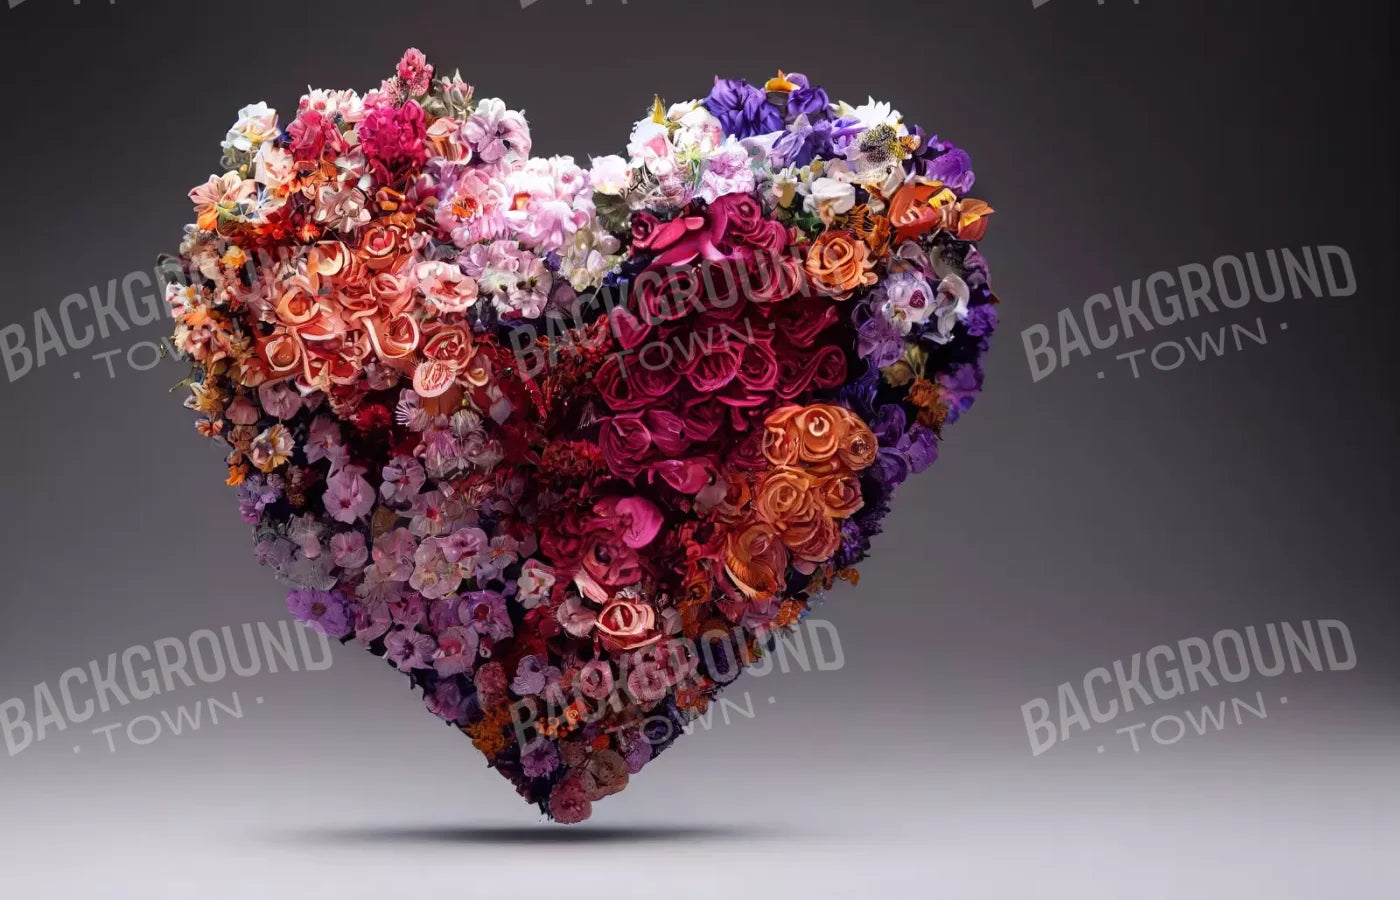 Heart Of Flowers 14’X9’ Ultracloth (168 X 108 Inch) Backdrop